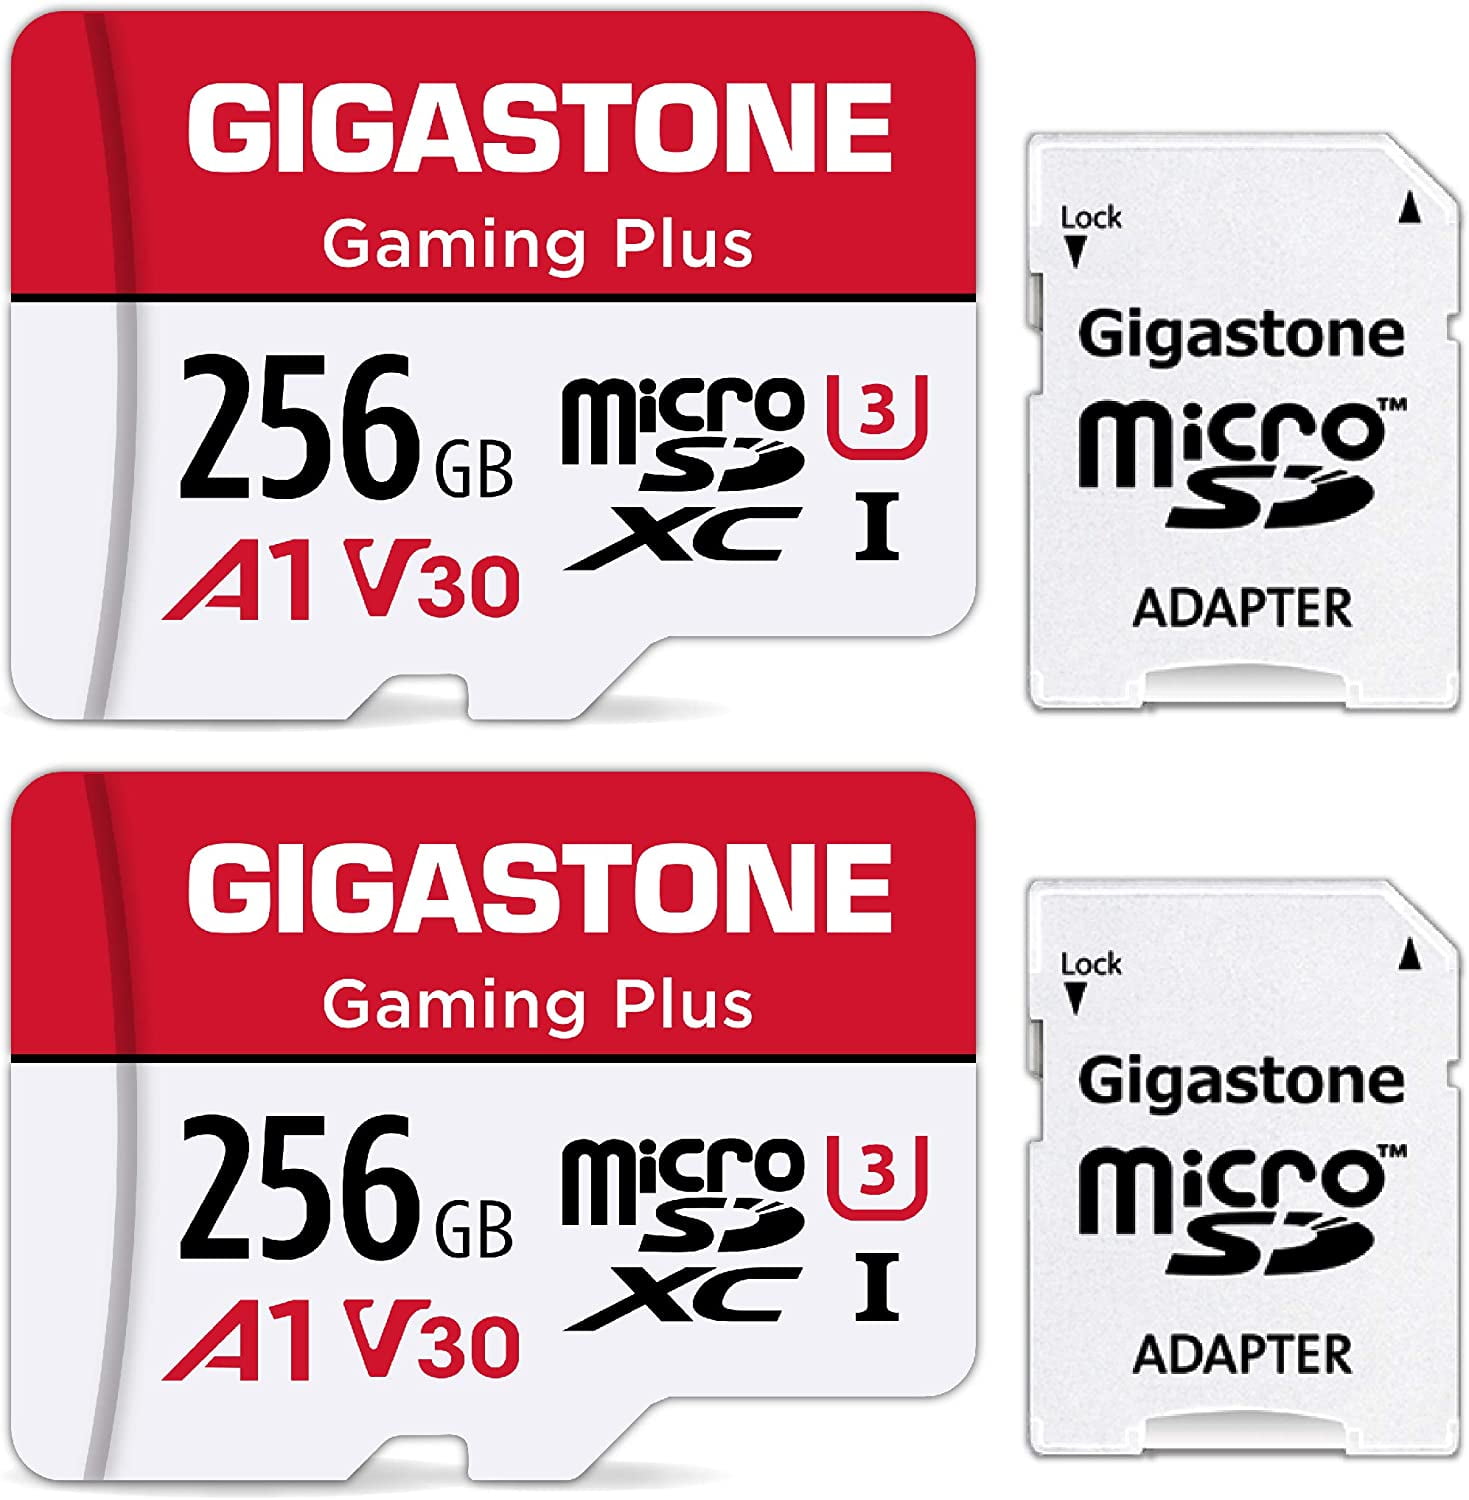 mavepine Centimeter regering Gigastone 256GB Micro SD Card, Gaming Plus, Nintendo Switch Compatible,  High Speed 100MB/s, 4K Video Recording, compatible with Nintendo Switch  Dash Cams GoPro Cameras, 2 Pack (2x256GB) - Walmart.com